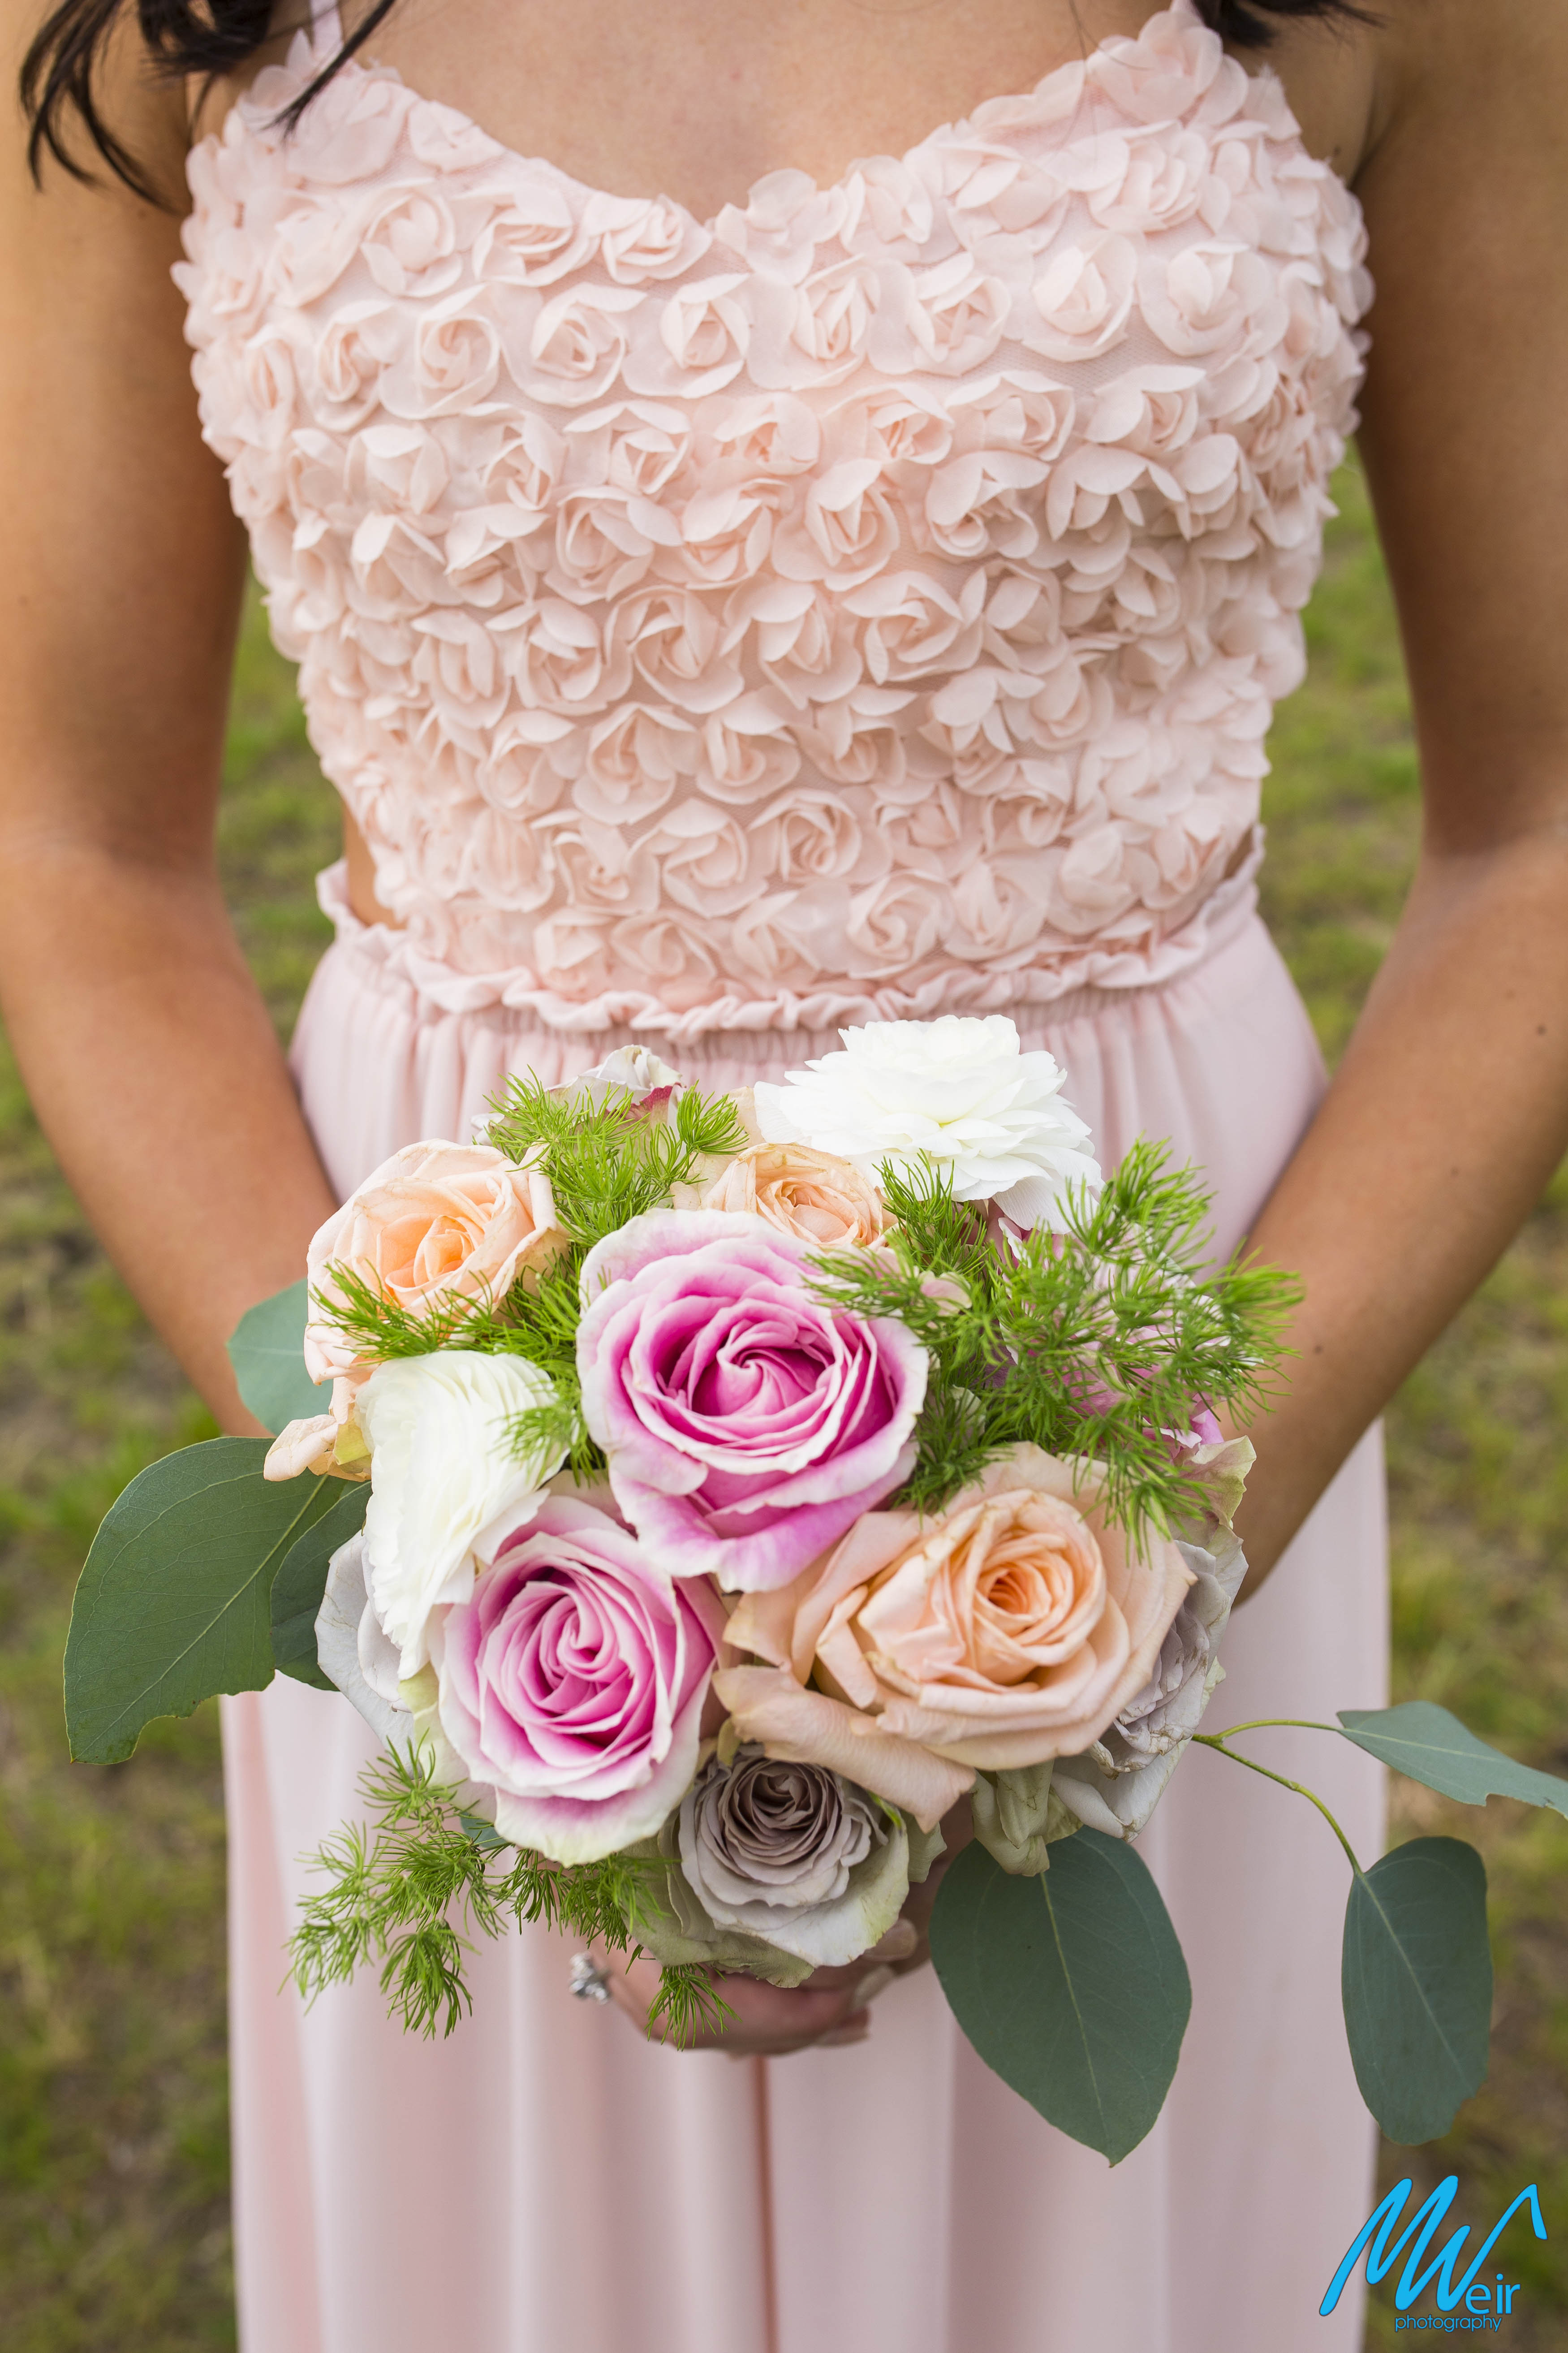 Pale pink bridesmaid dress with pink rose bouquet